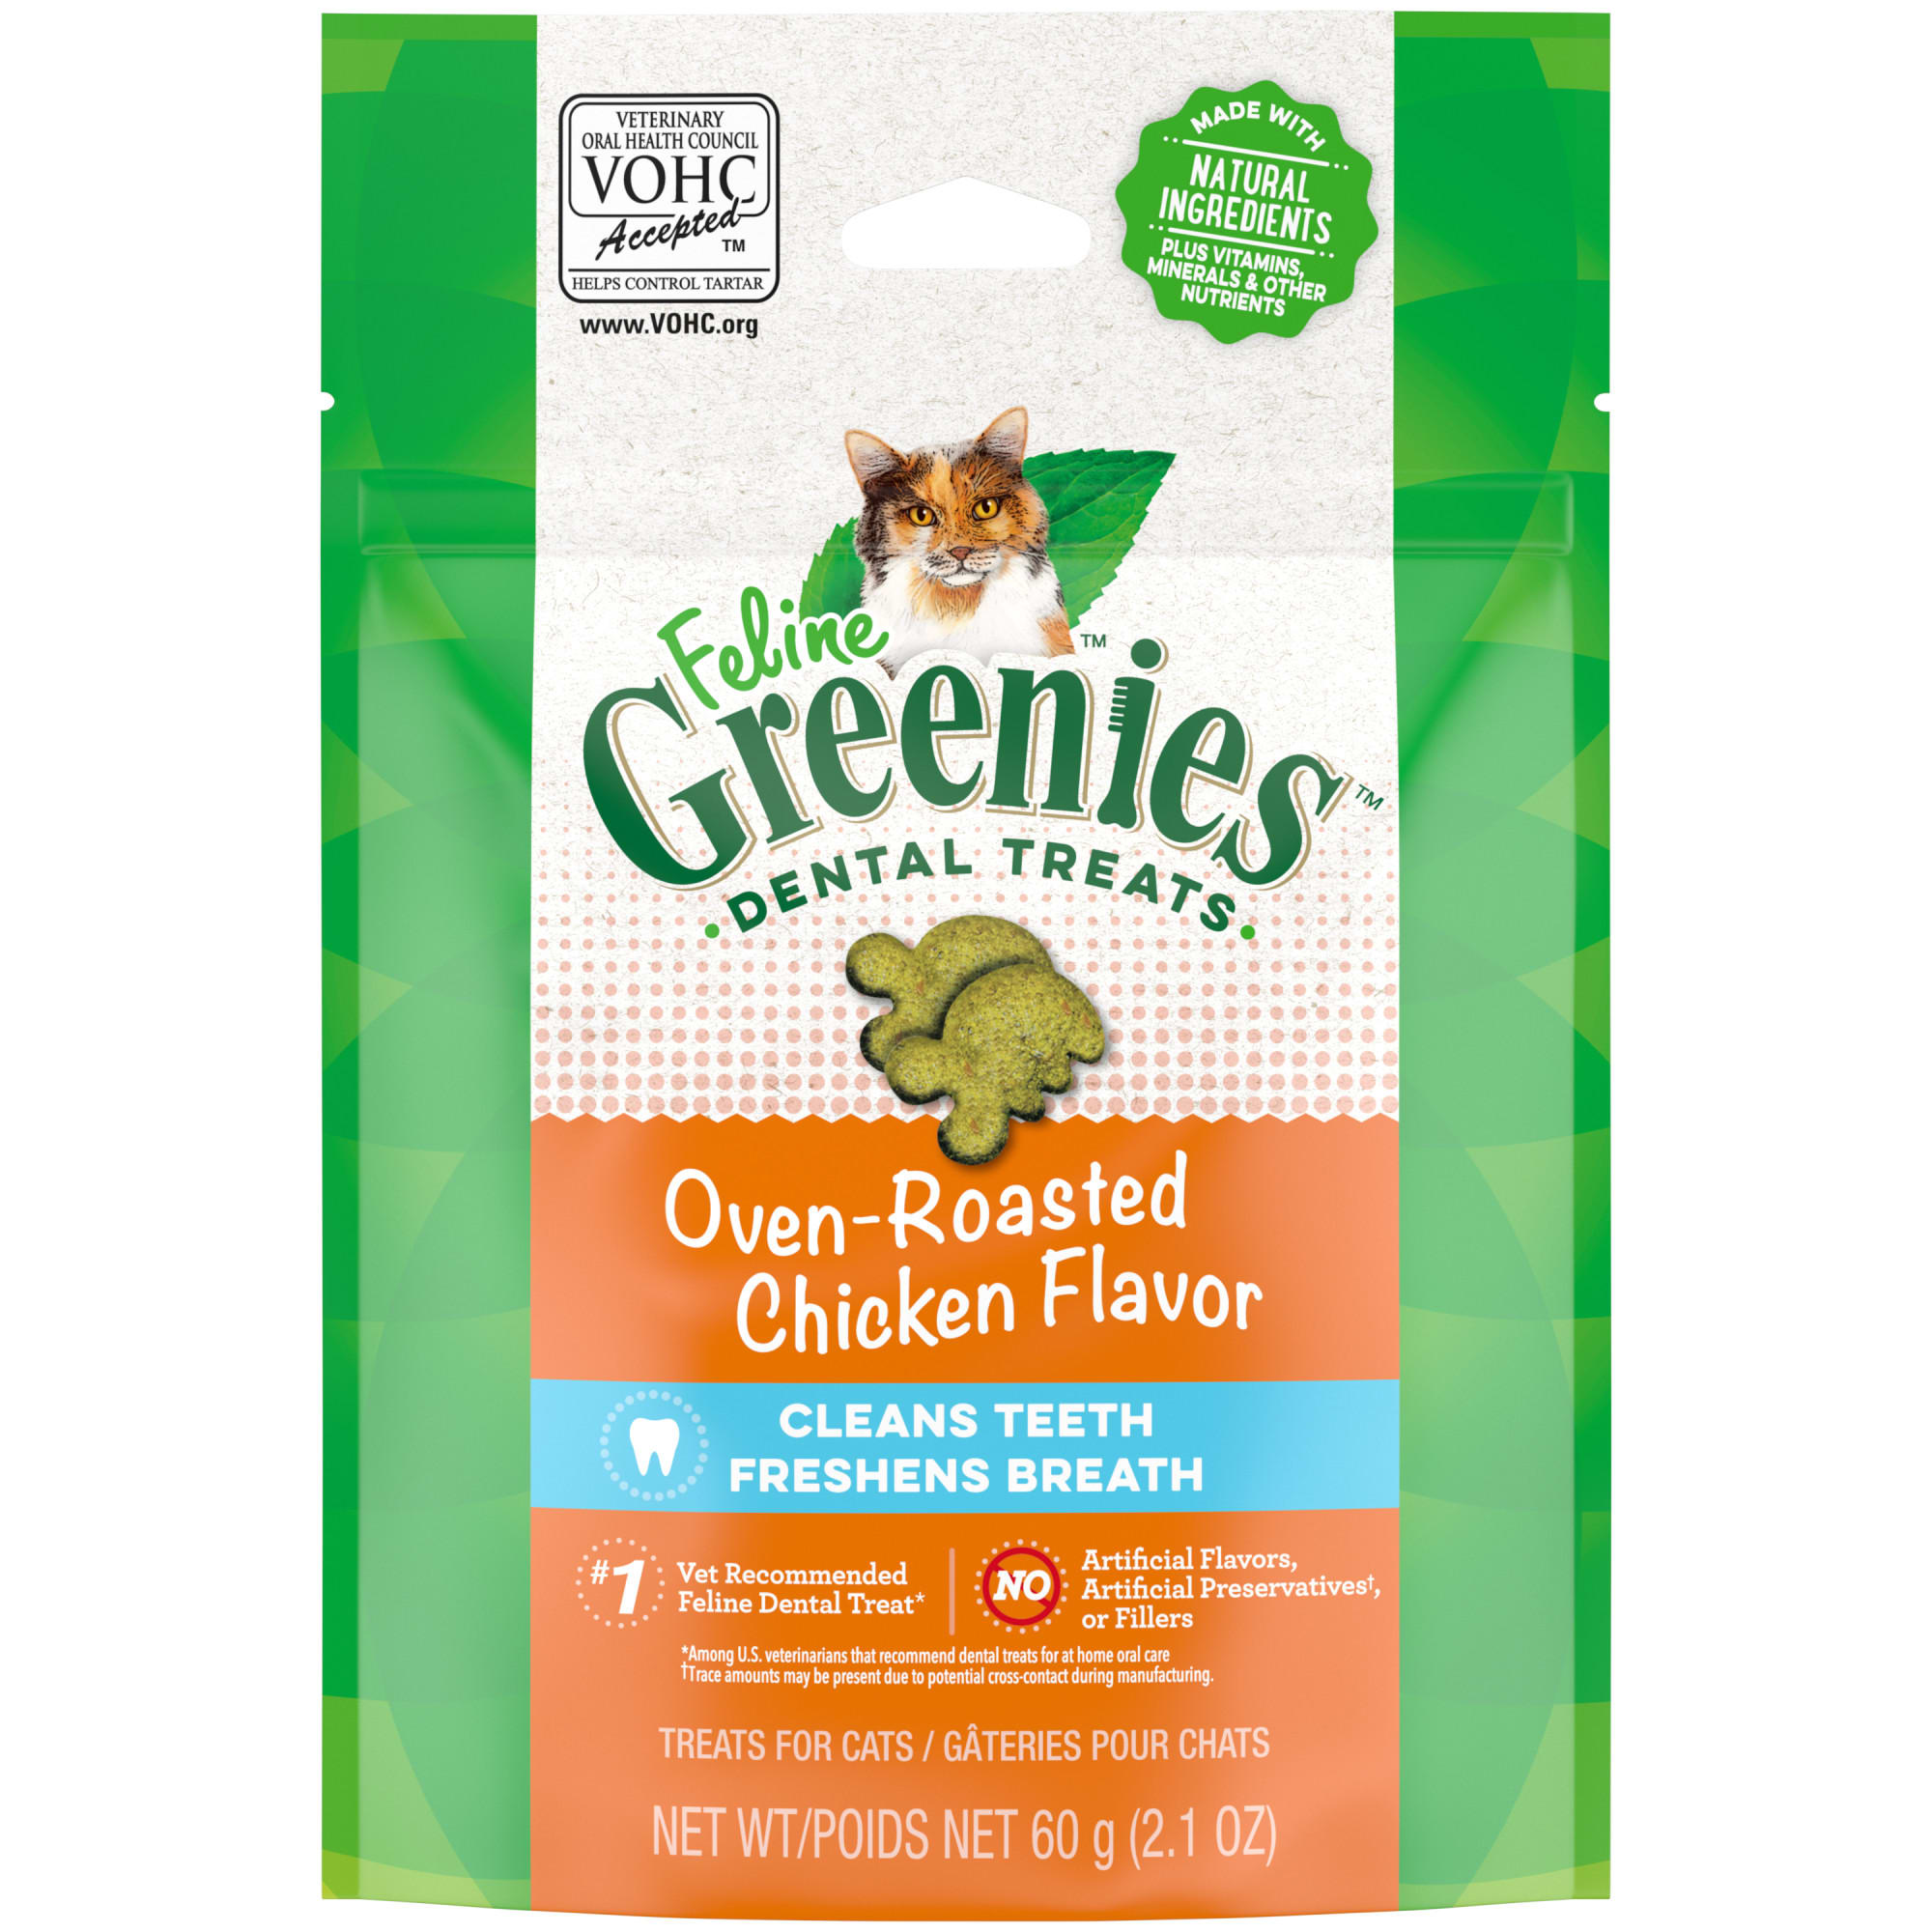 Photos - Cat Food Greenies Natural Oven Roasted Chicken Flavor Adult Dental Cat Tre 